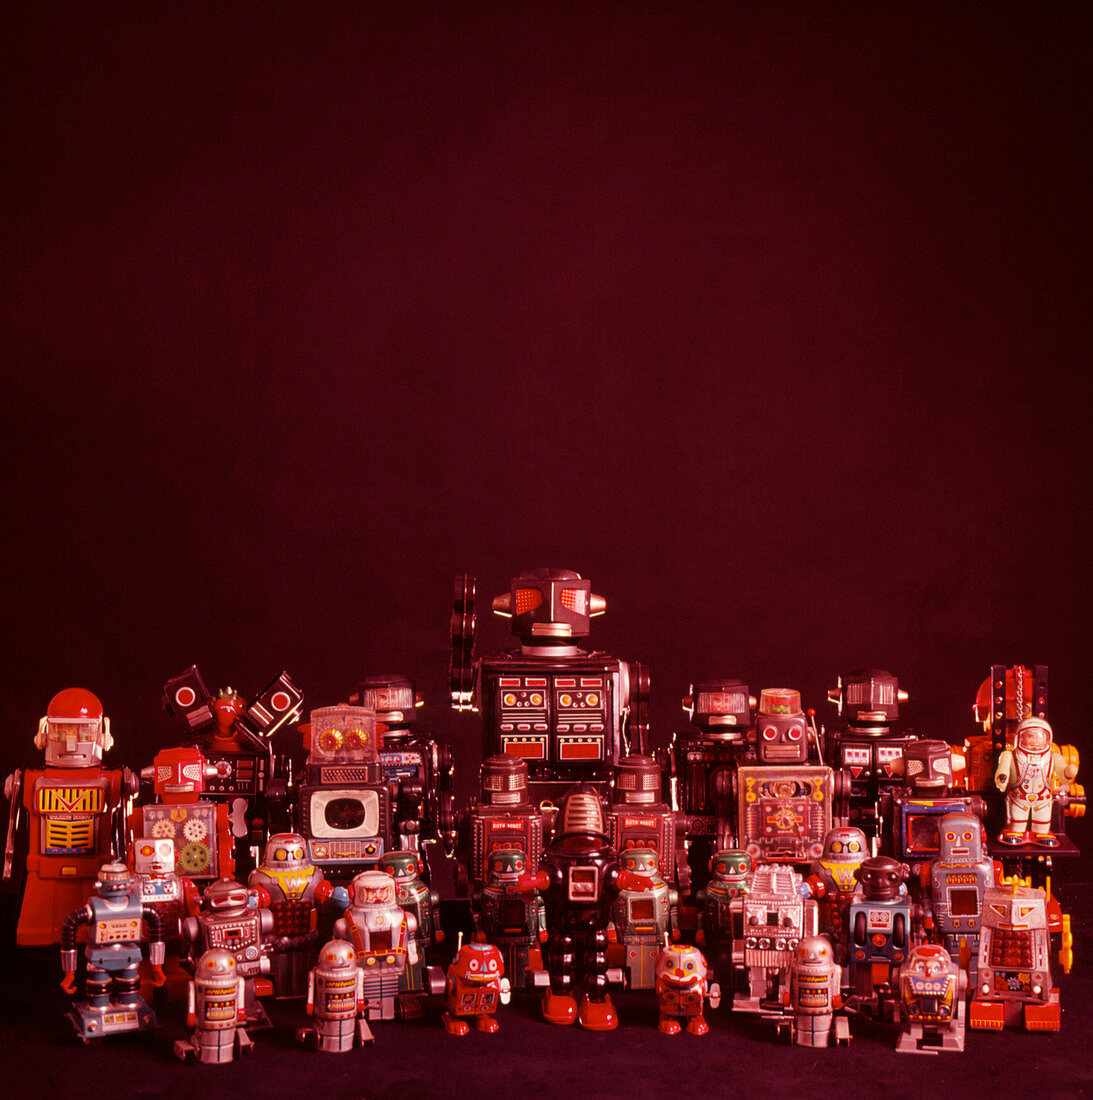 A collection of toy robots